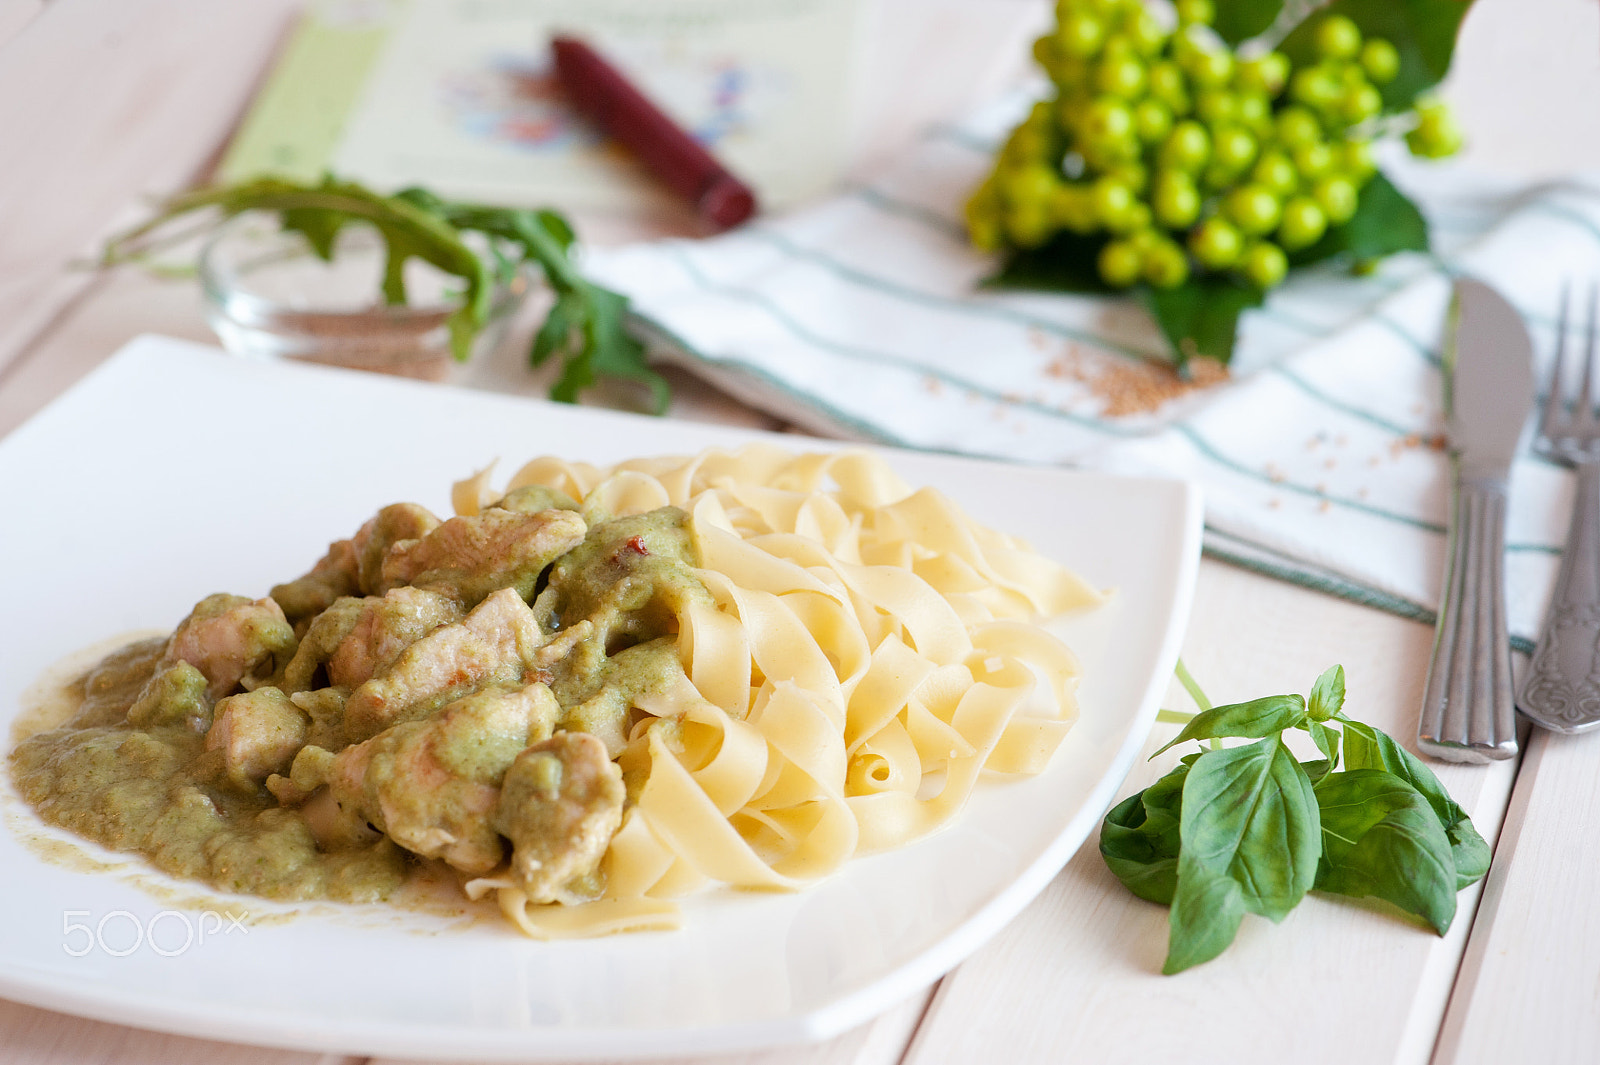 Nikon D700 sample photo. Fettuccine and chicken with fresh basil and pesto in a white plate photography